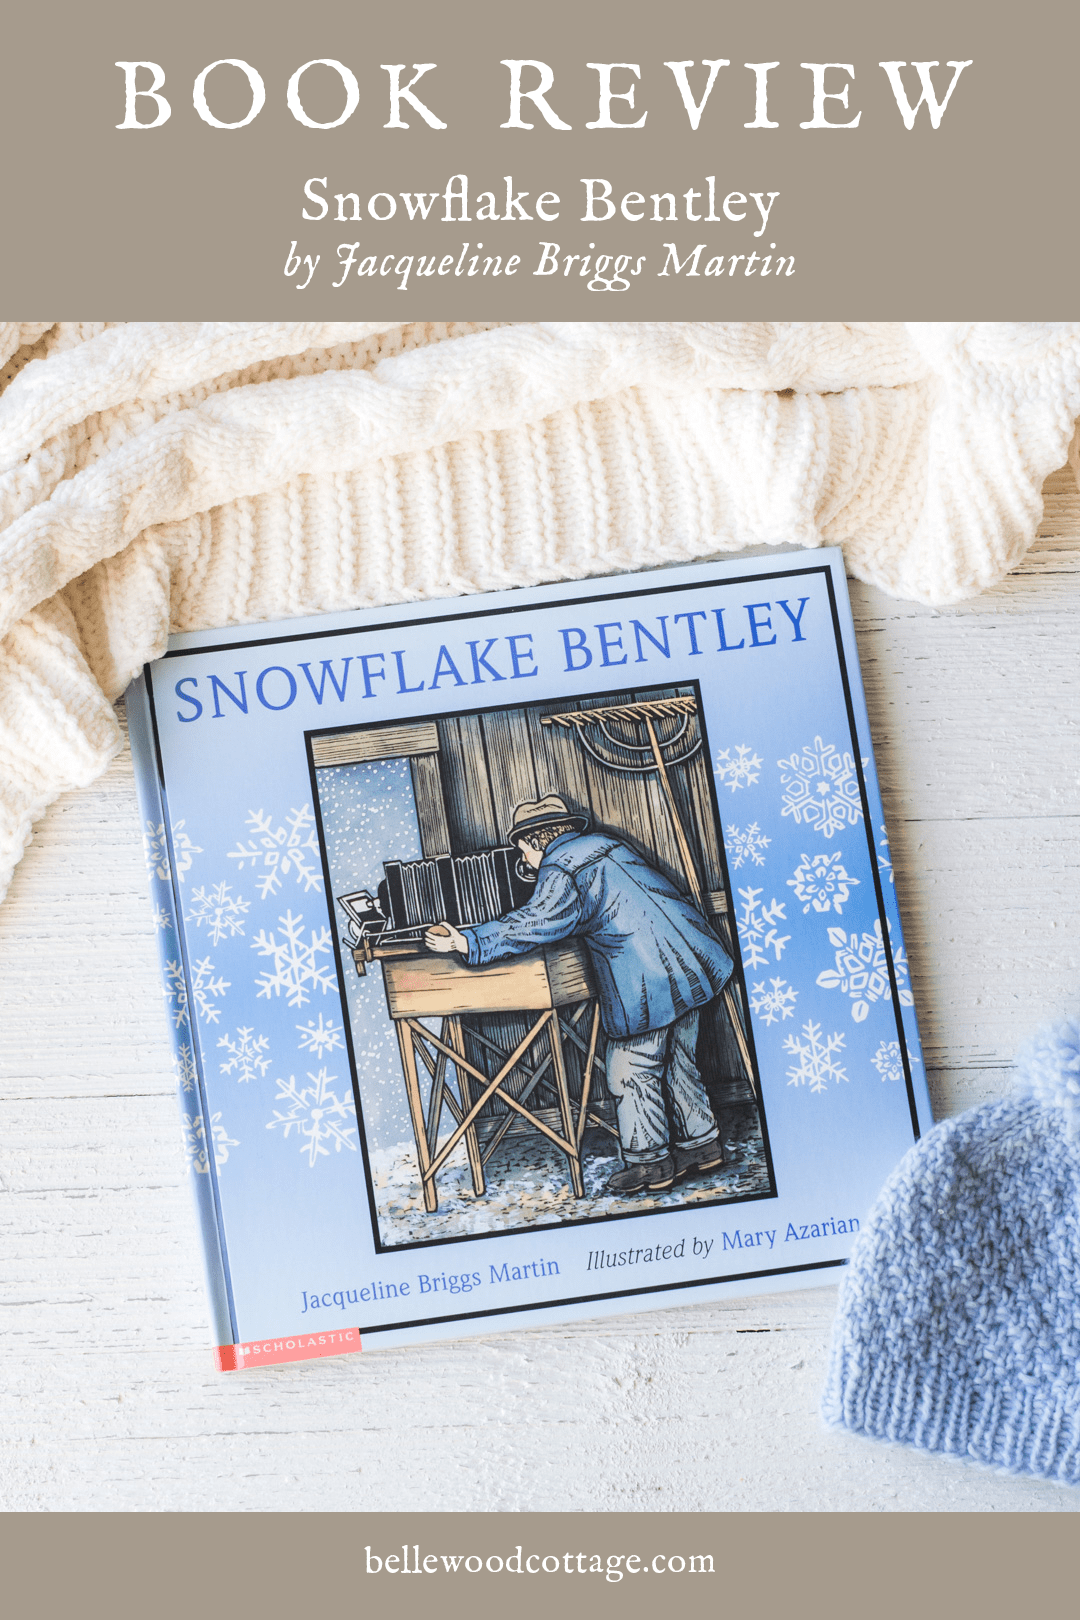 The picture book, Snowflake Bentley, unopened on a wooden surface.